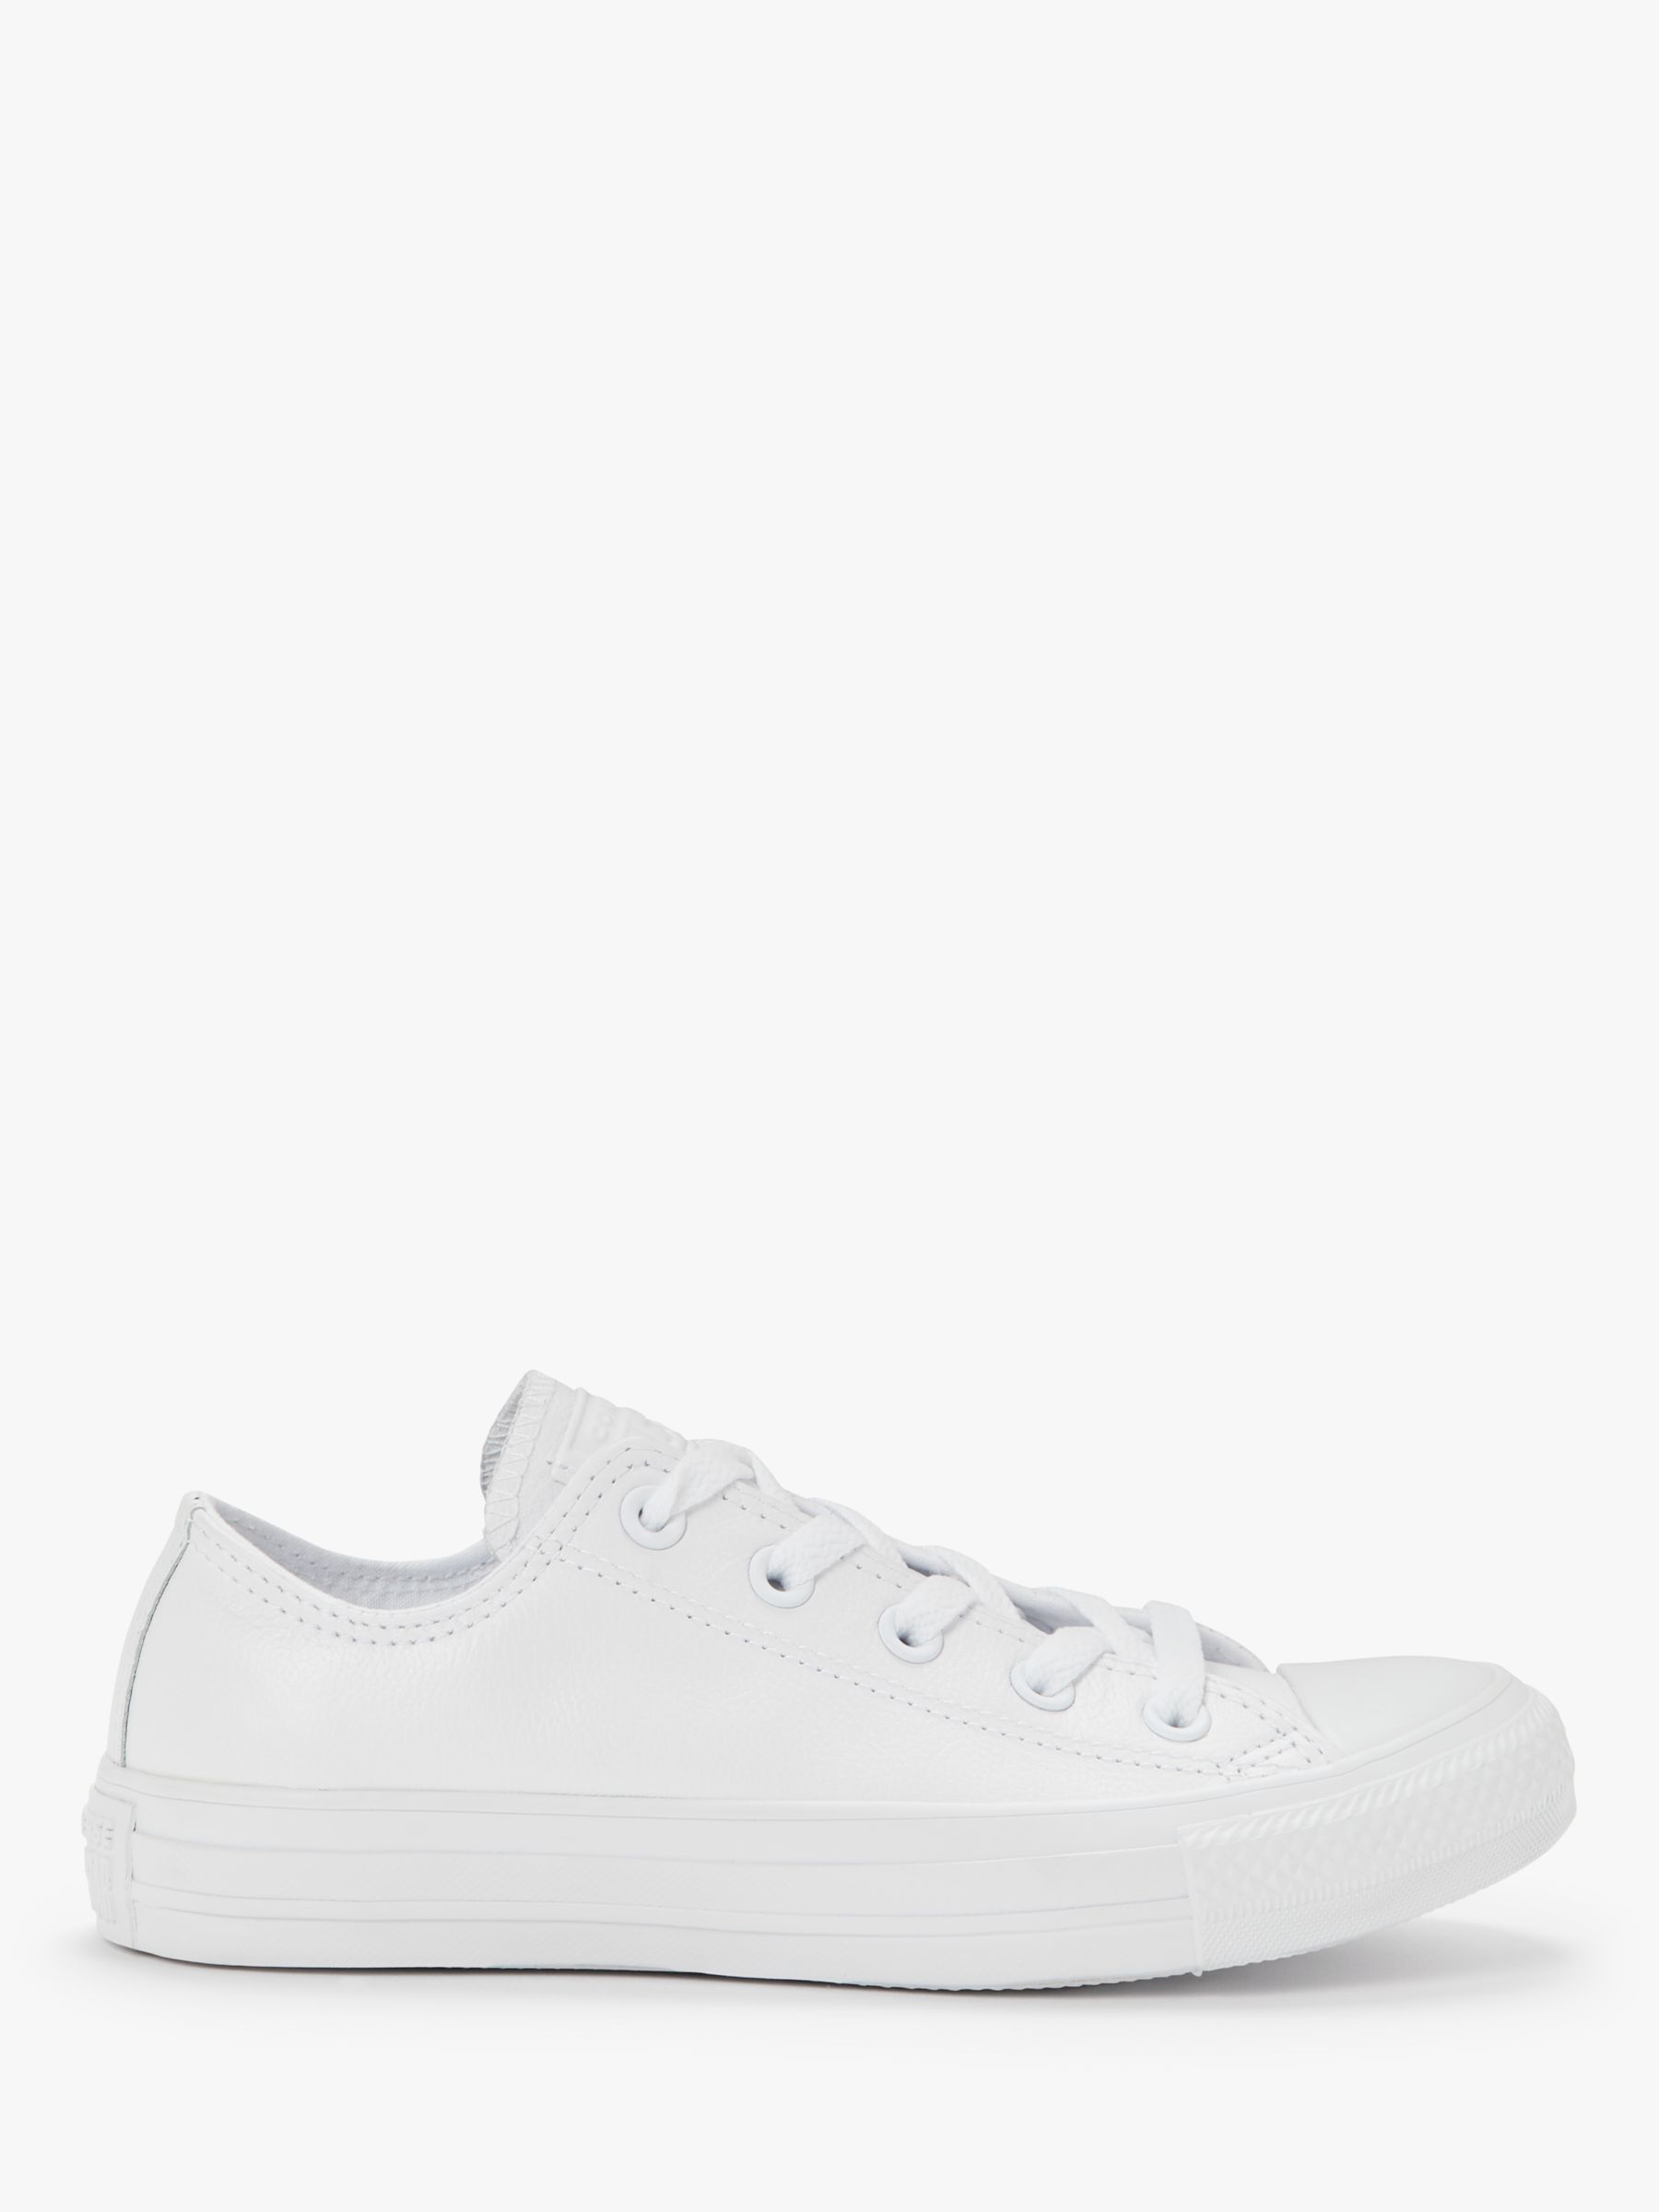 converse suede ox leather